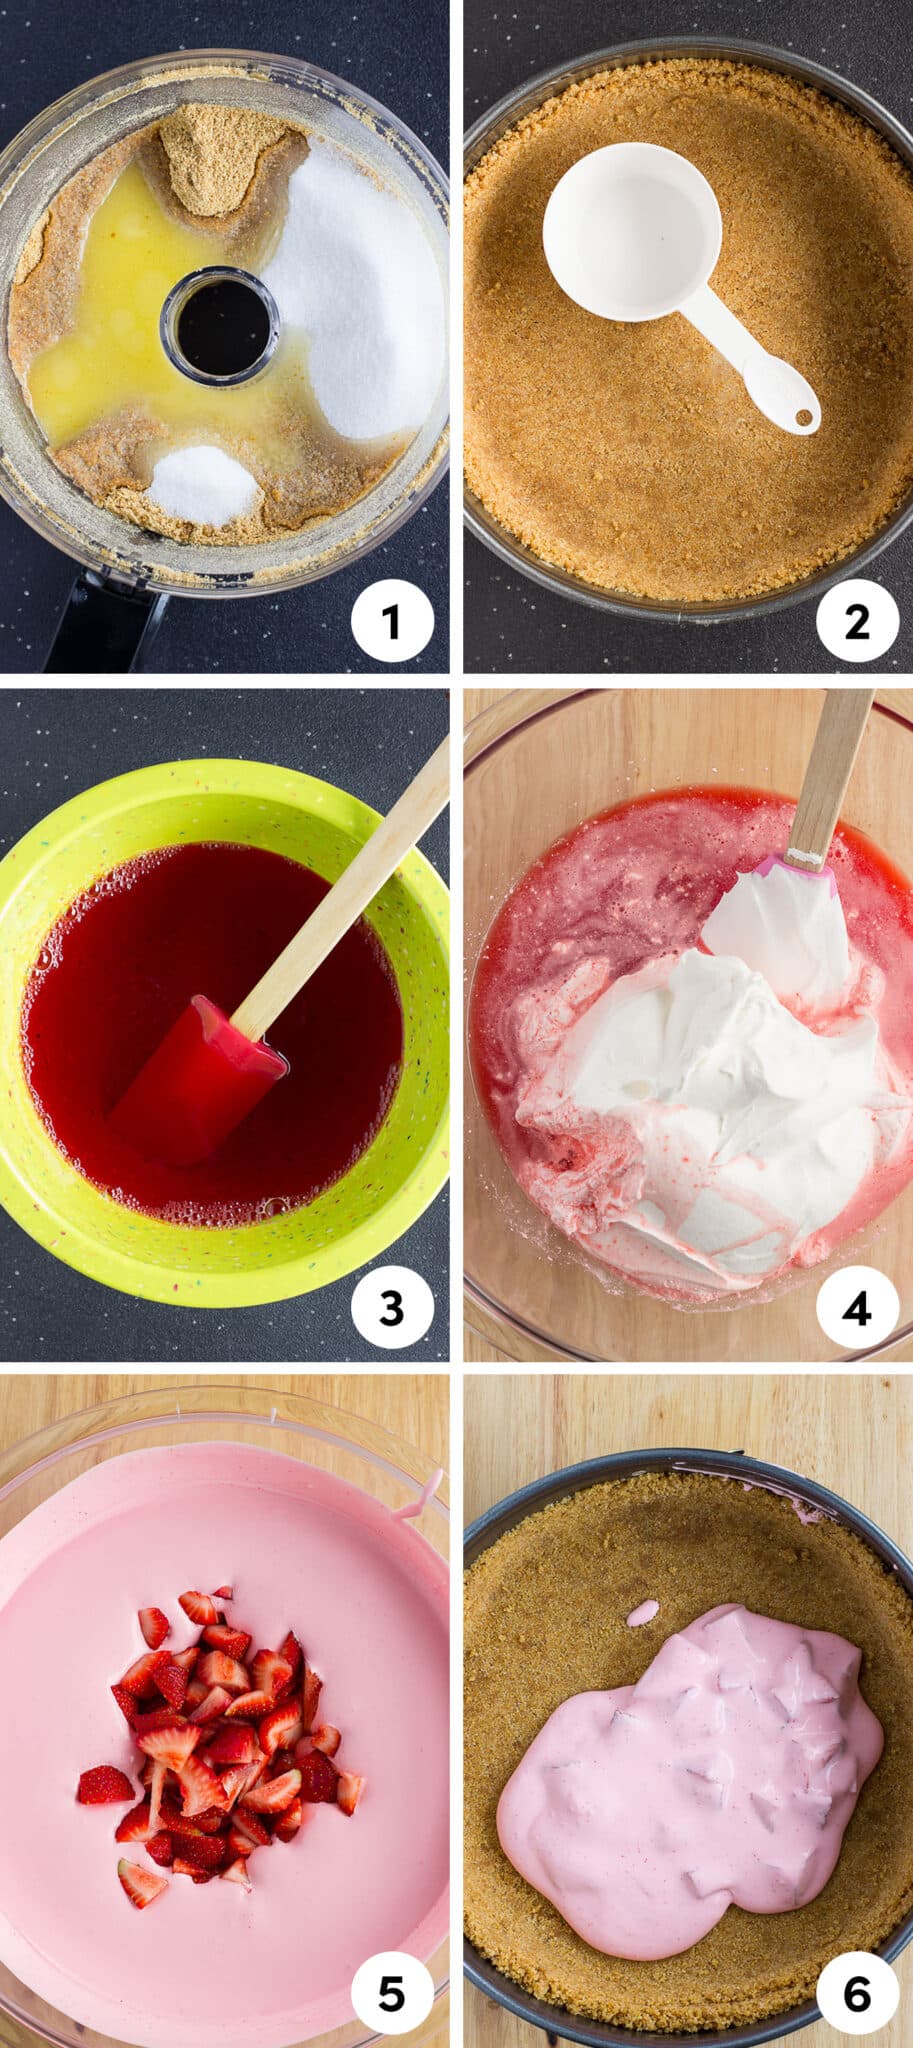 Step by step photos on how to make strawberry pie.